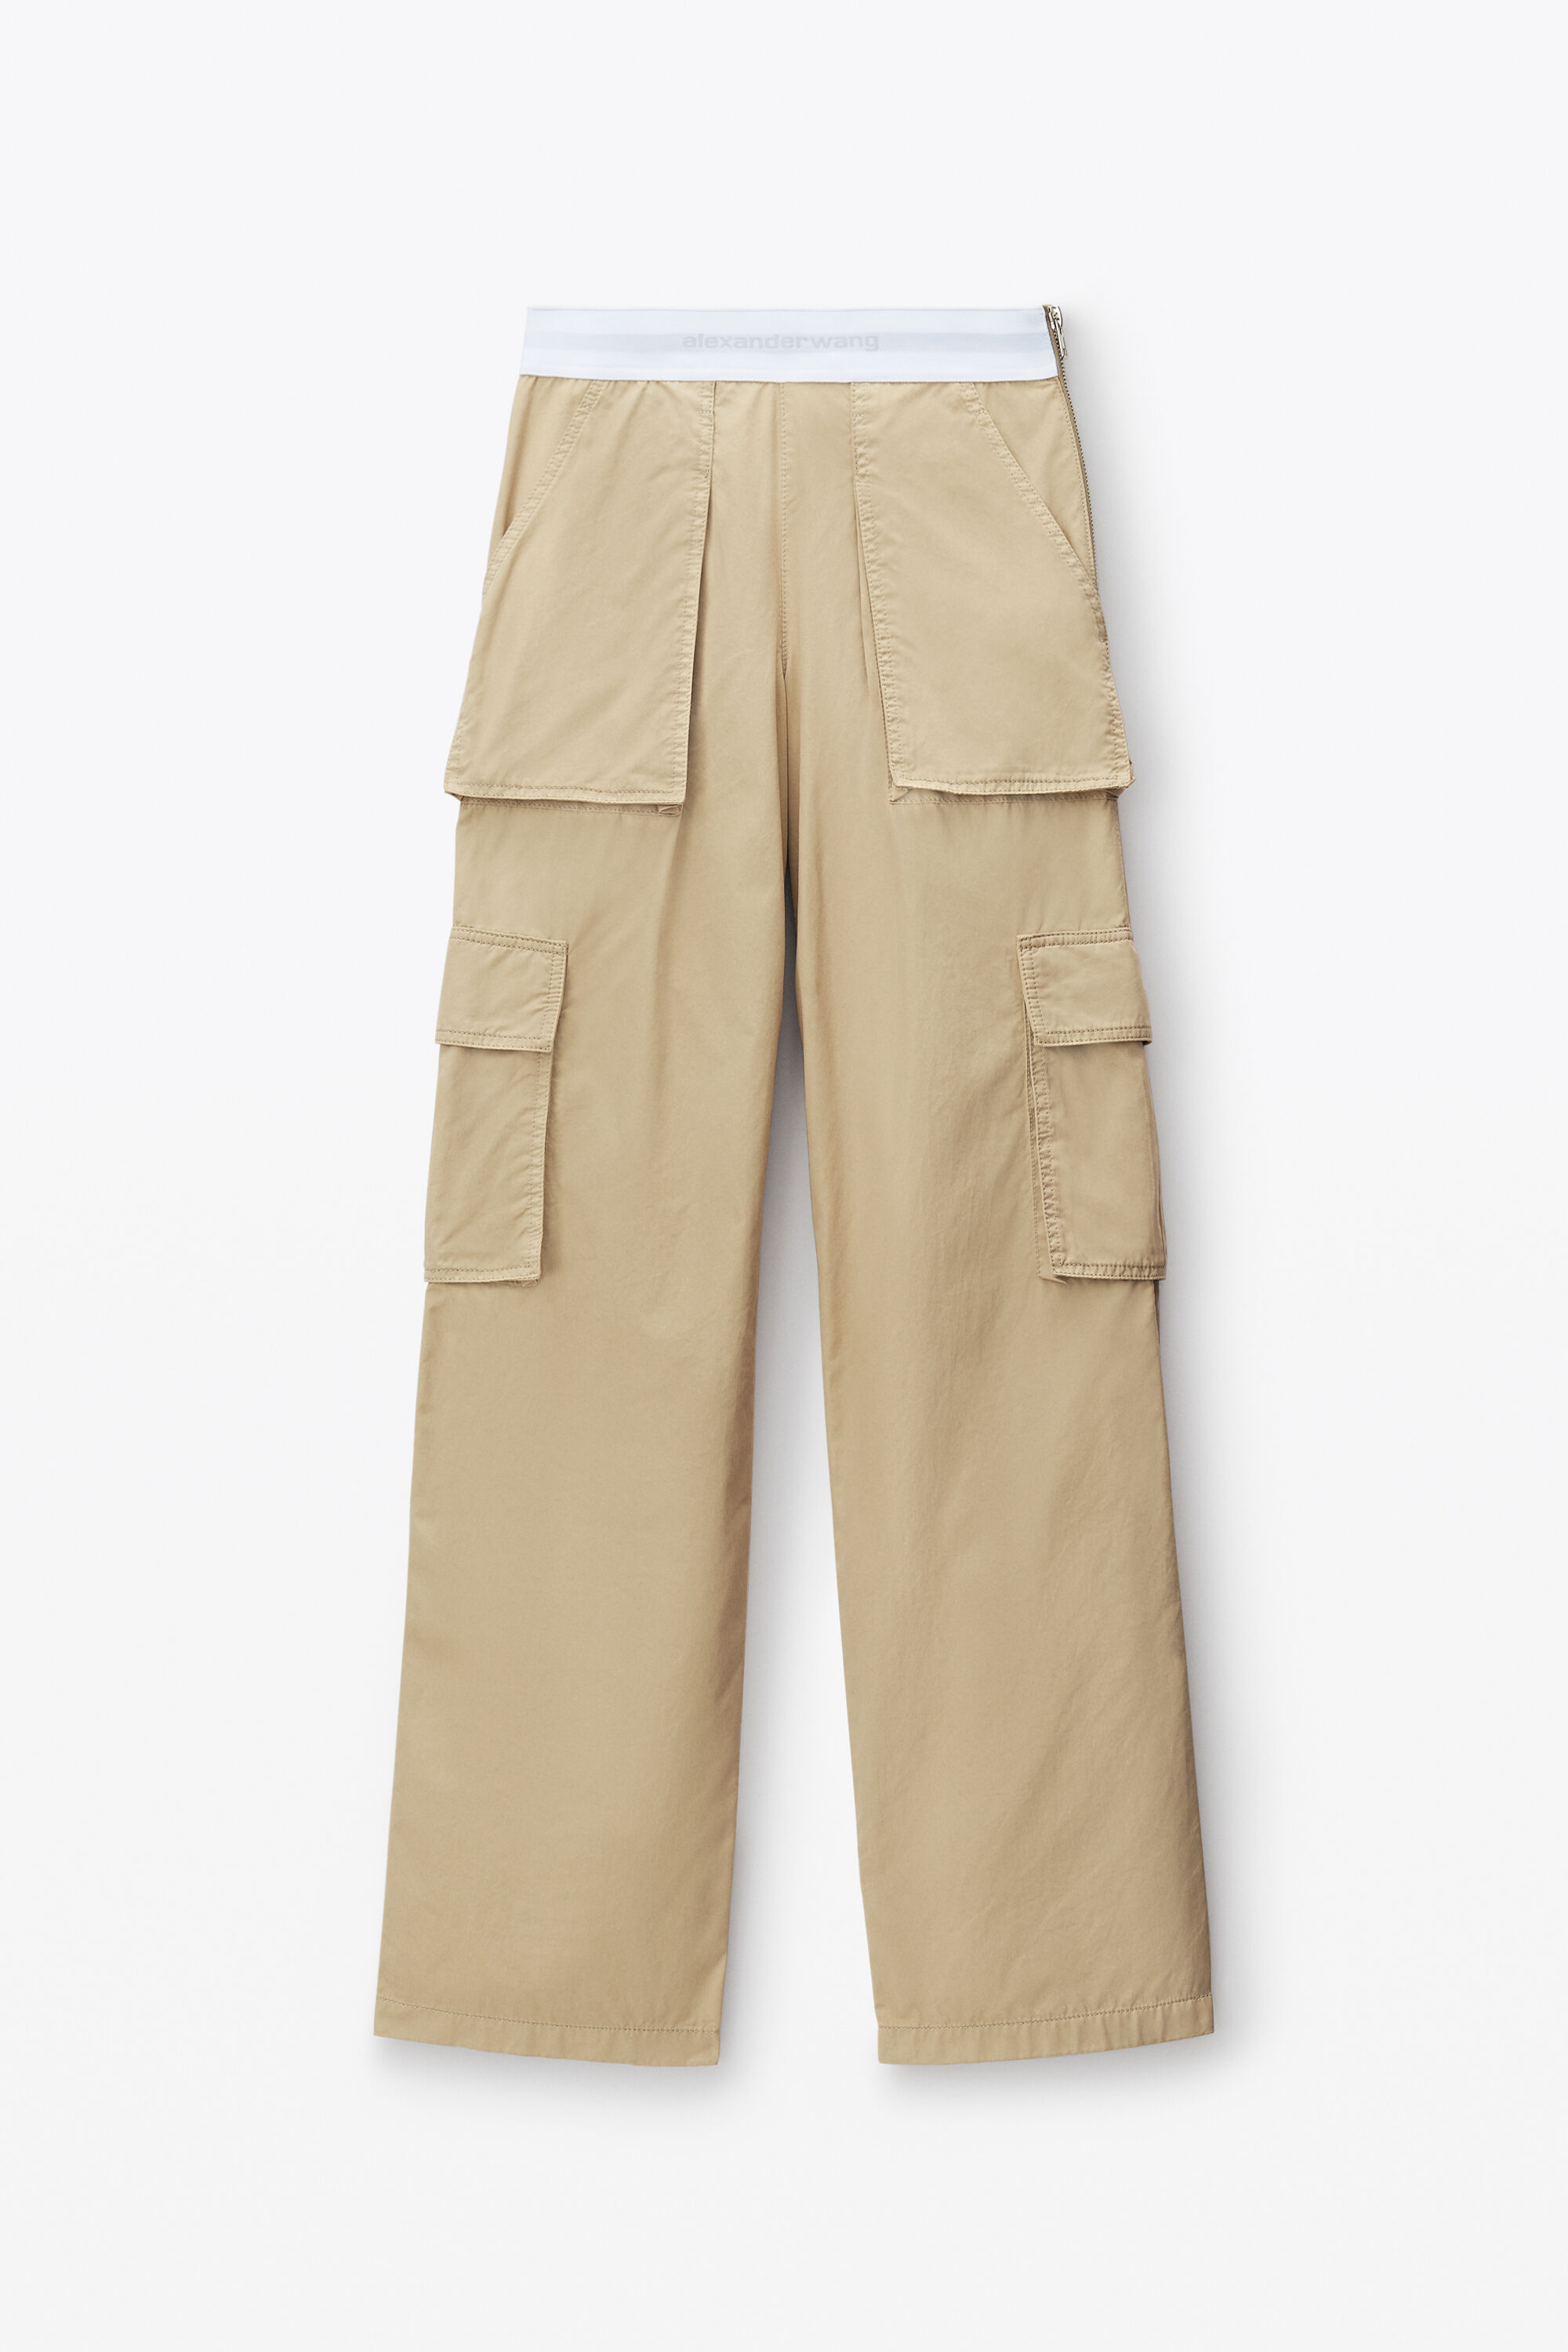 alexanderwang Mid-Rise Cargo Rave Pants in Cotton Twill FEATHER